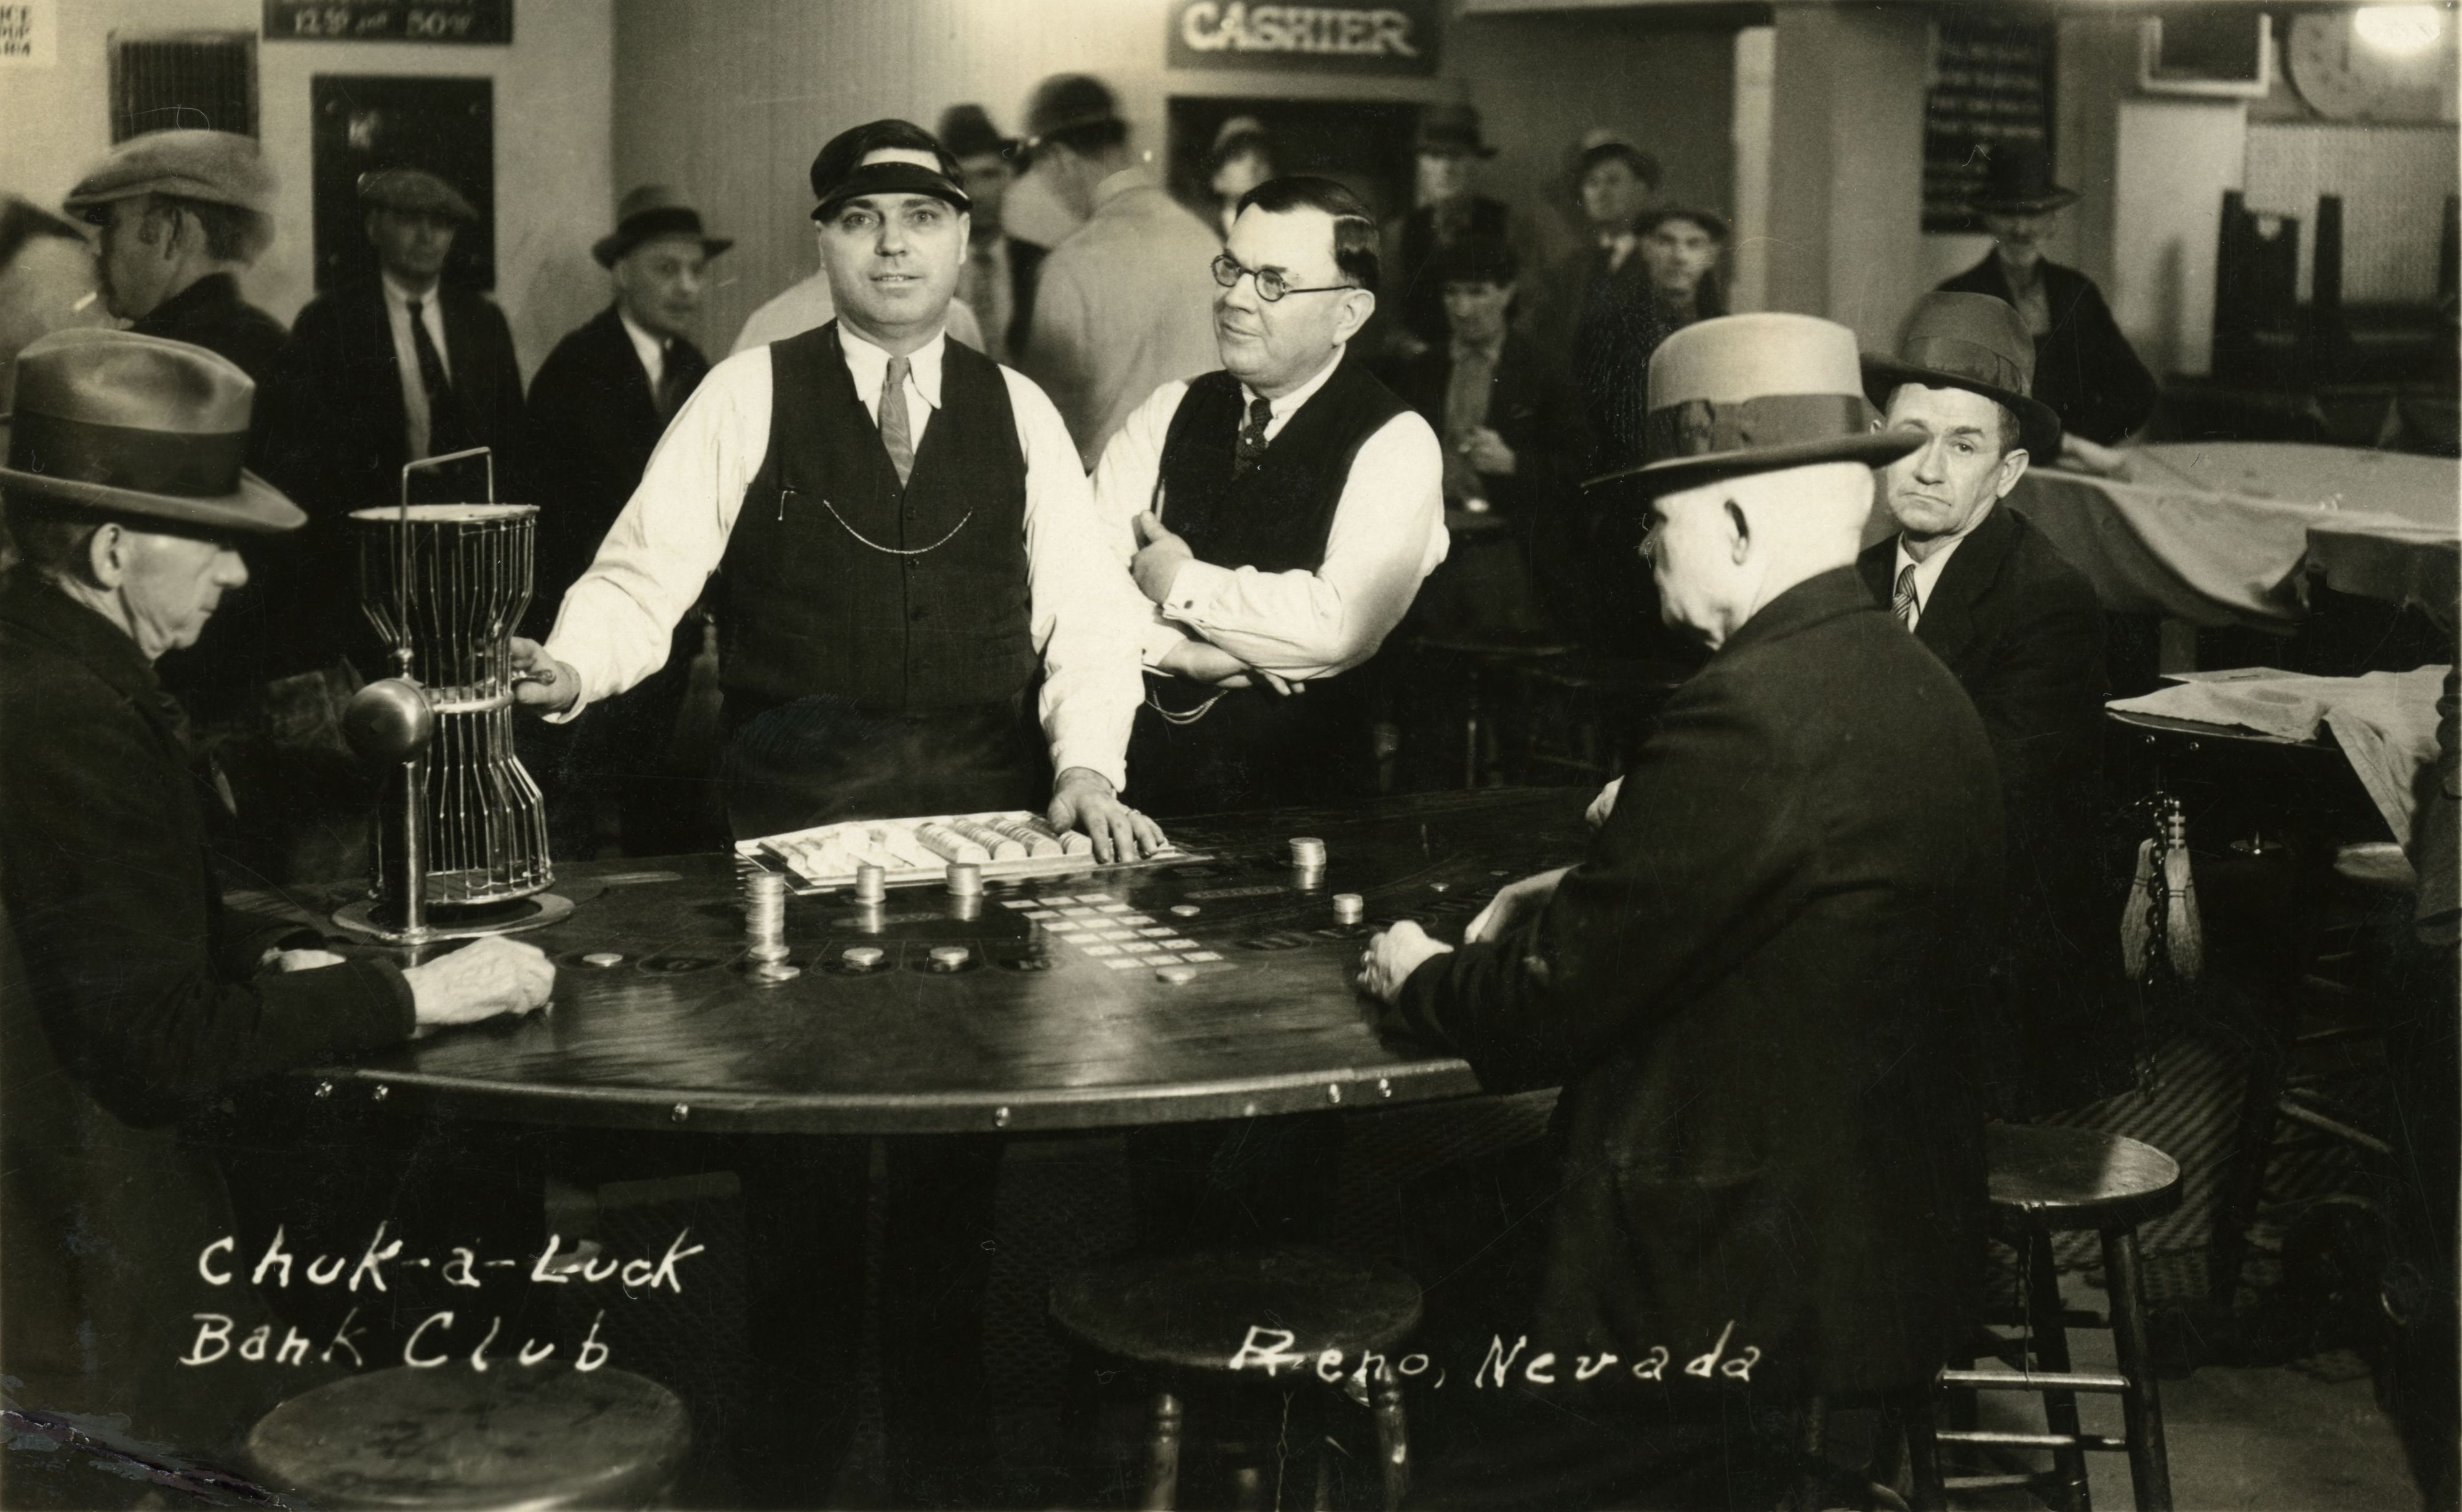 Men sitting around a table with an extended Chuck-A-Luck staking layout and bird-cage sitting on it.